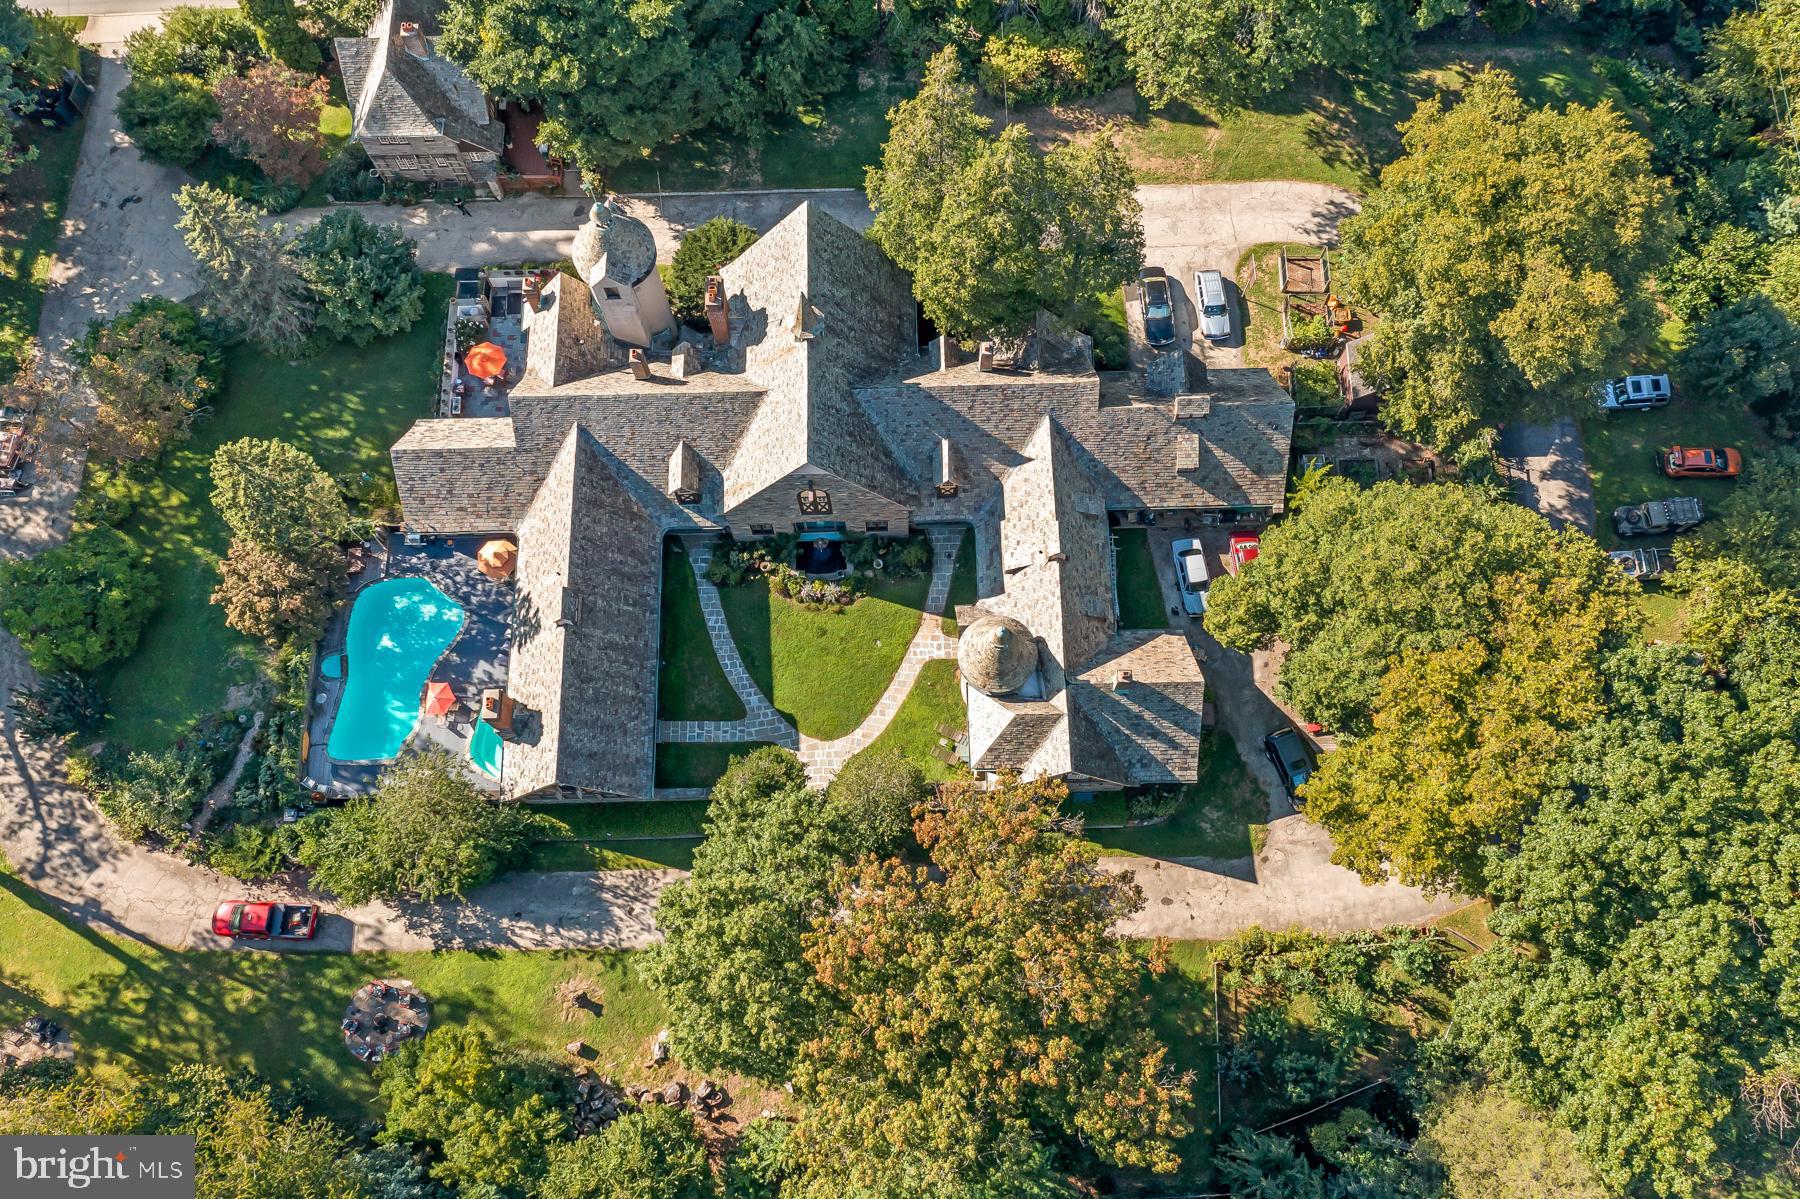 an aerial view of a house with swimming pool and large trees